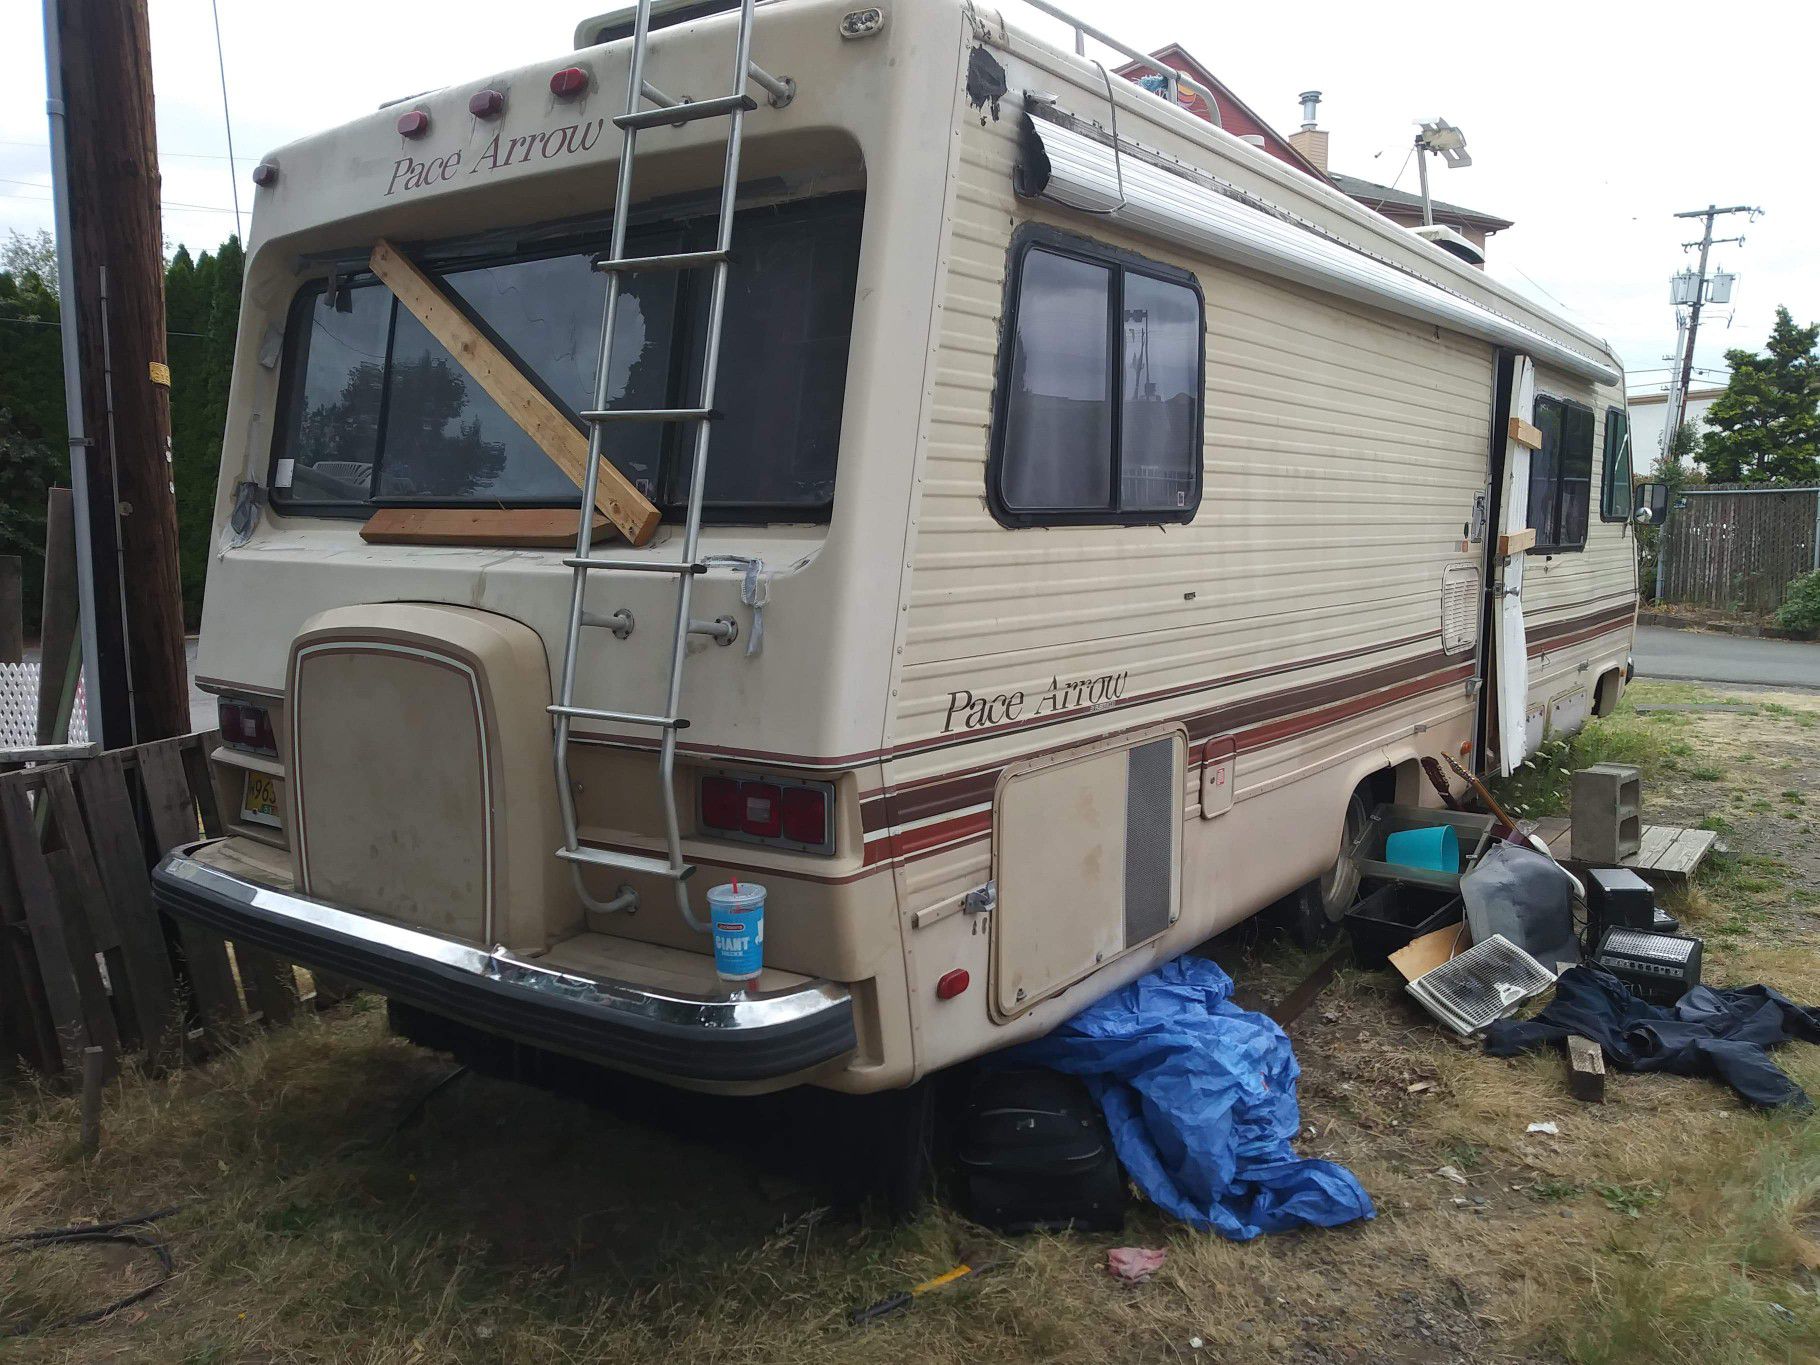 RV Pacearrow 85' $200 obo you haul! Doesn't run. Will need to be towed